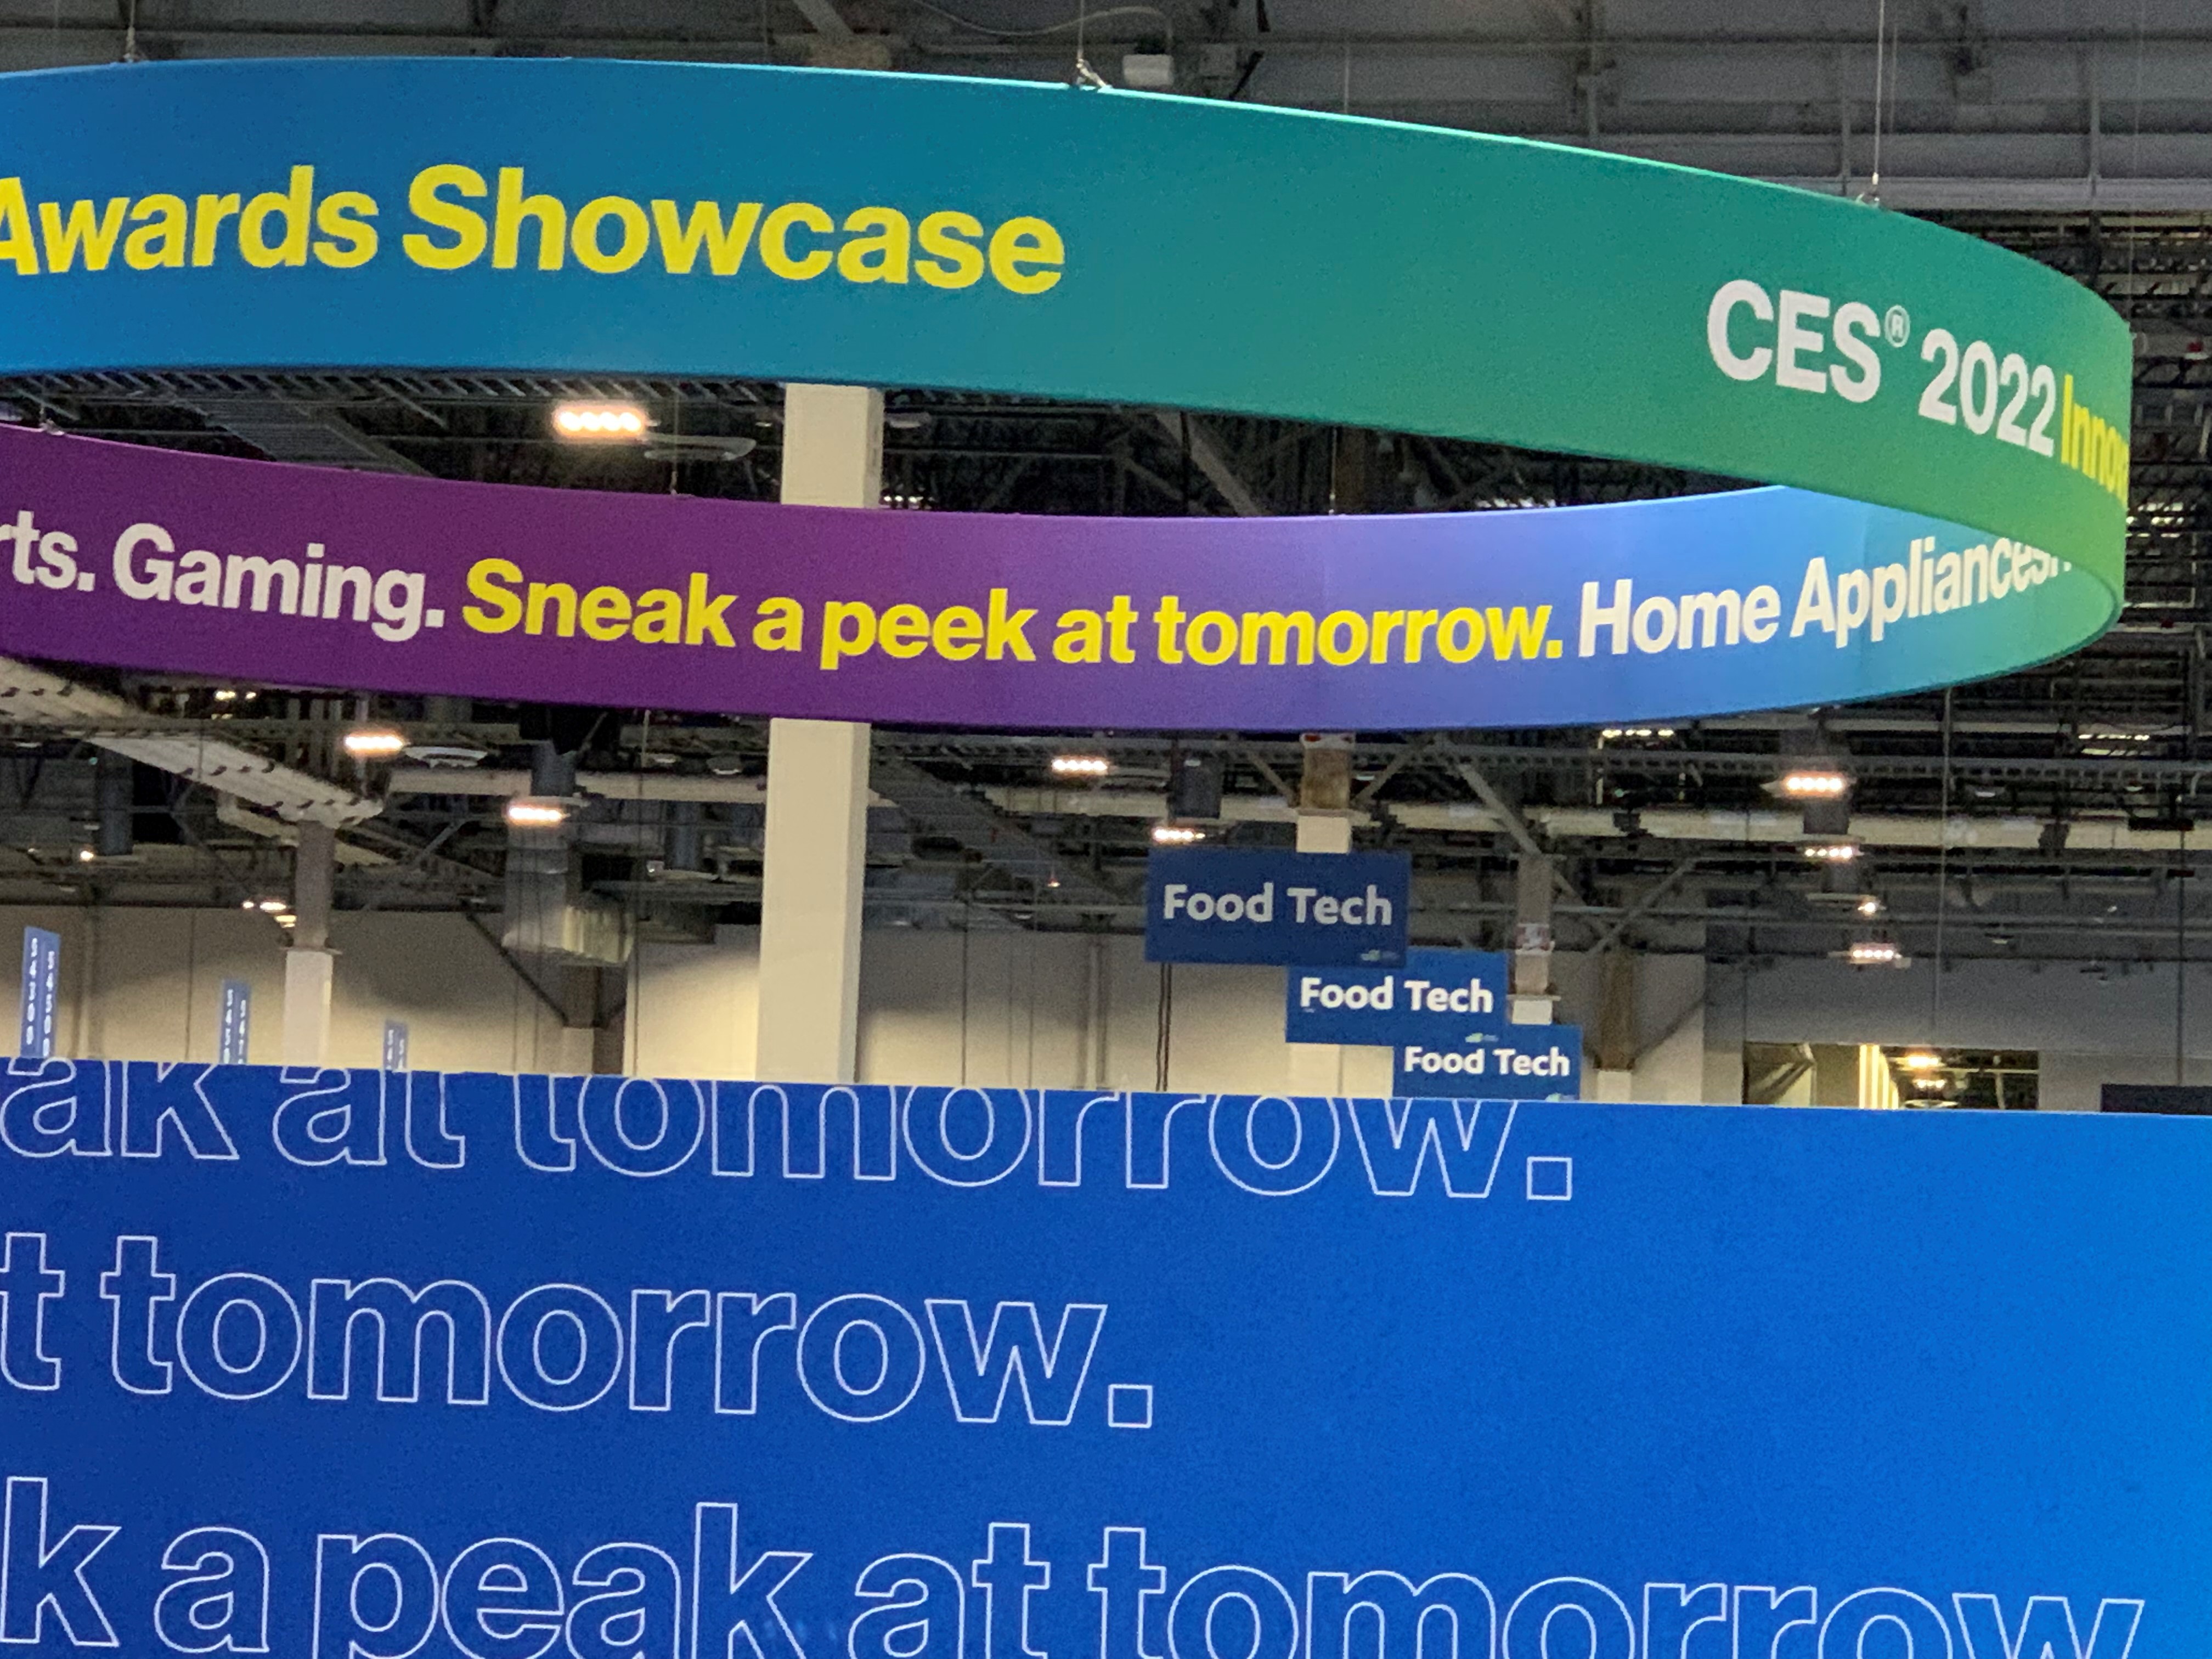 Food tech at CES.jpg